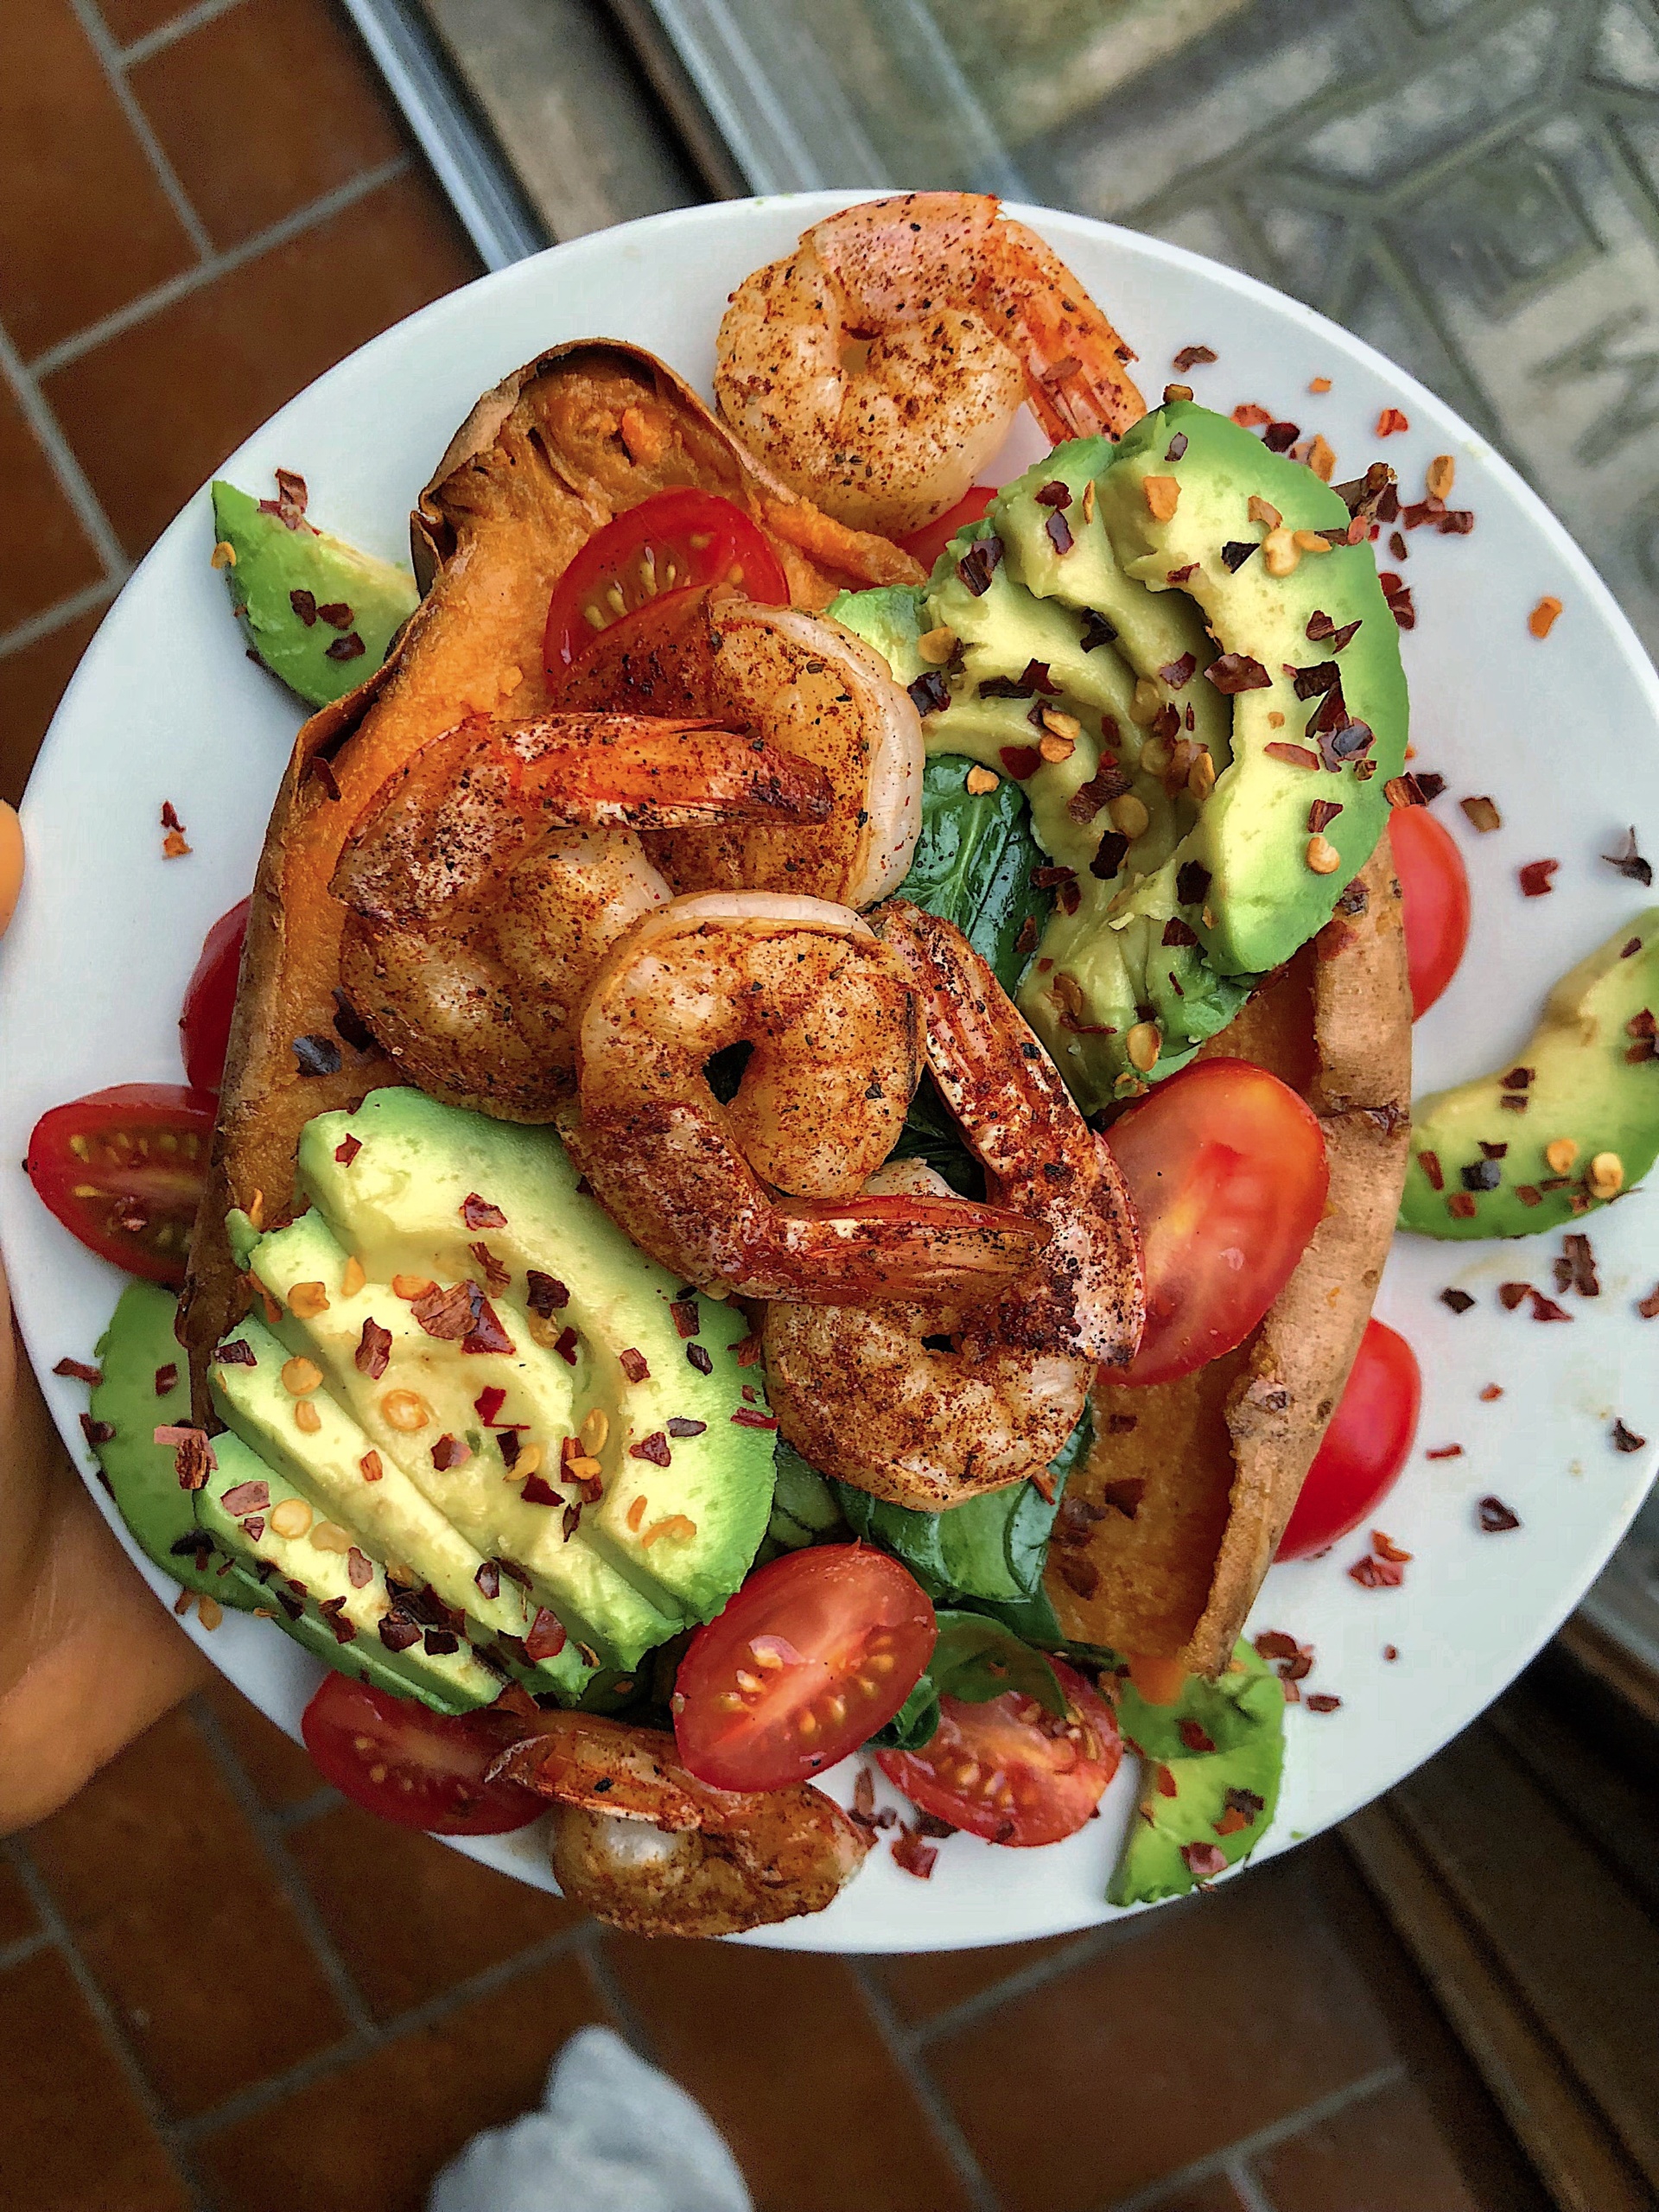 Shrimp, avocado, tomatoes, and spinach stuffed in a sweet potato on a white plate.